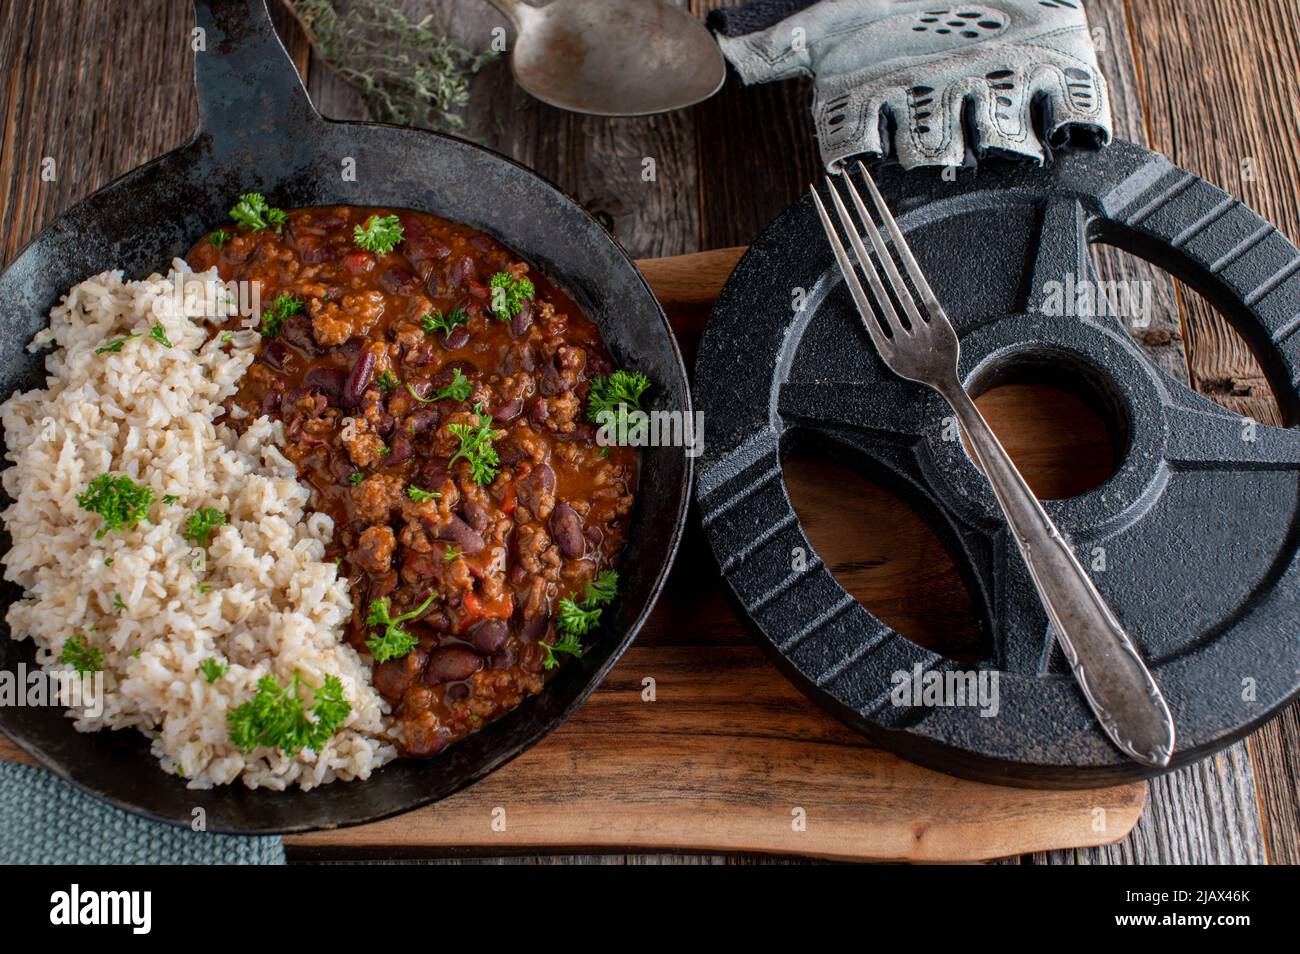 Fitness meal with brown rice and spicy bean stew with ground beef and vegetables Stock Photo